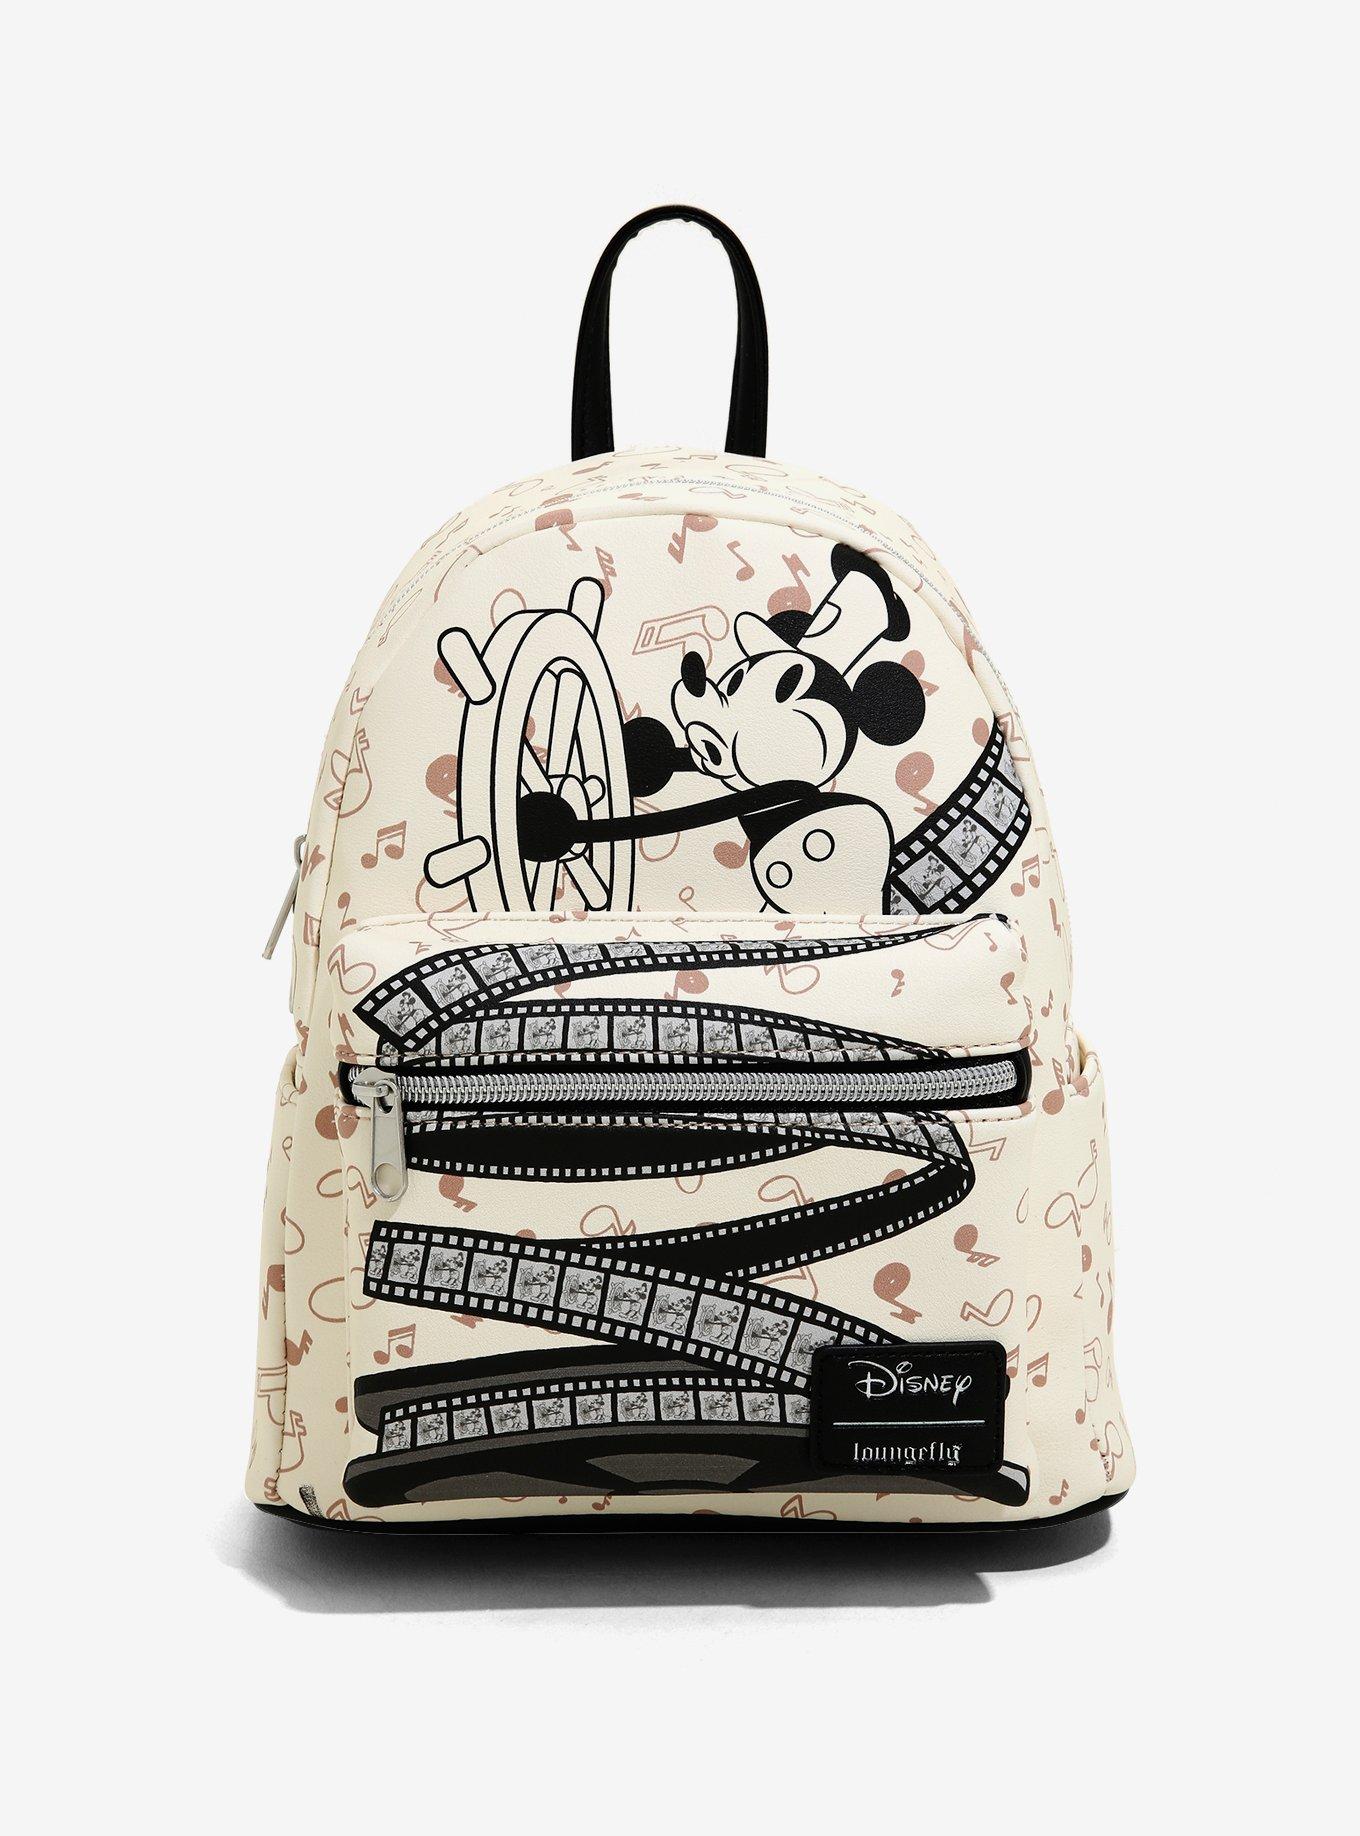 HKDL - Mickey Mouse Steamboat Willie Loungefly Mini Backpack  (Disney100)【Ready Stock】